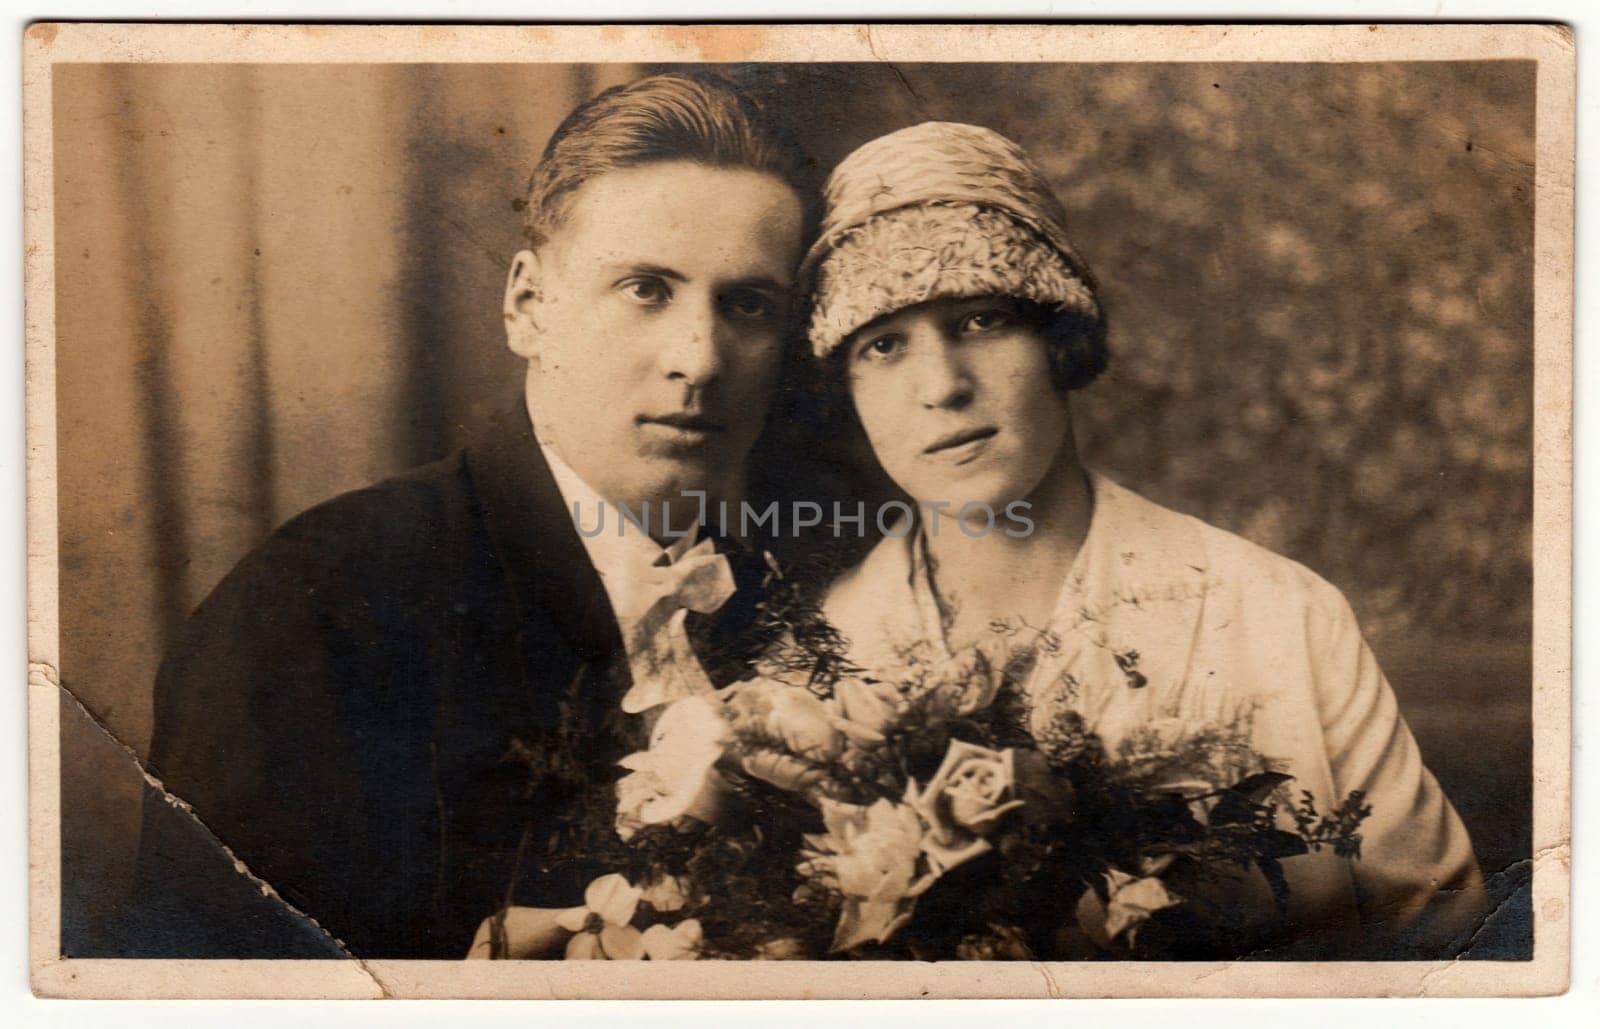 THE CZECHOSLOVAK REPUBLIC - CIRCA 1930s: Vintage photo shows newlyweds. Wedding ceremony - bride and groom. Bride holds wedding flowers. Retro black and white photography.